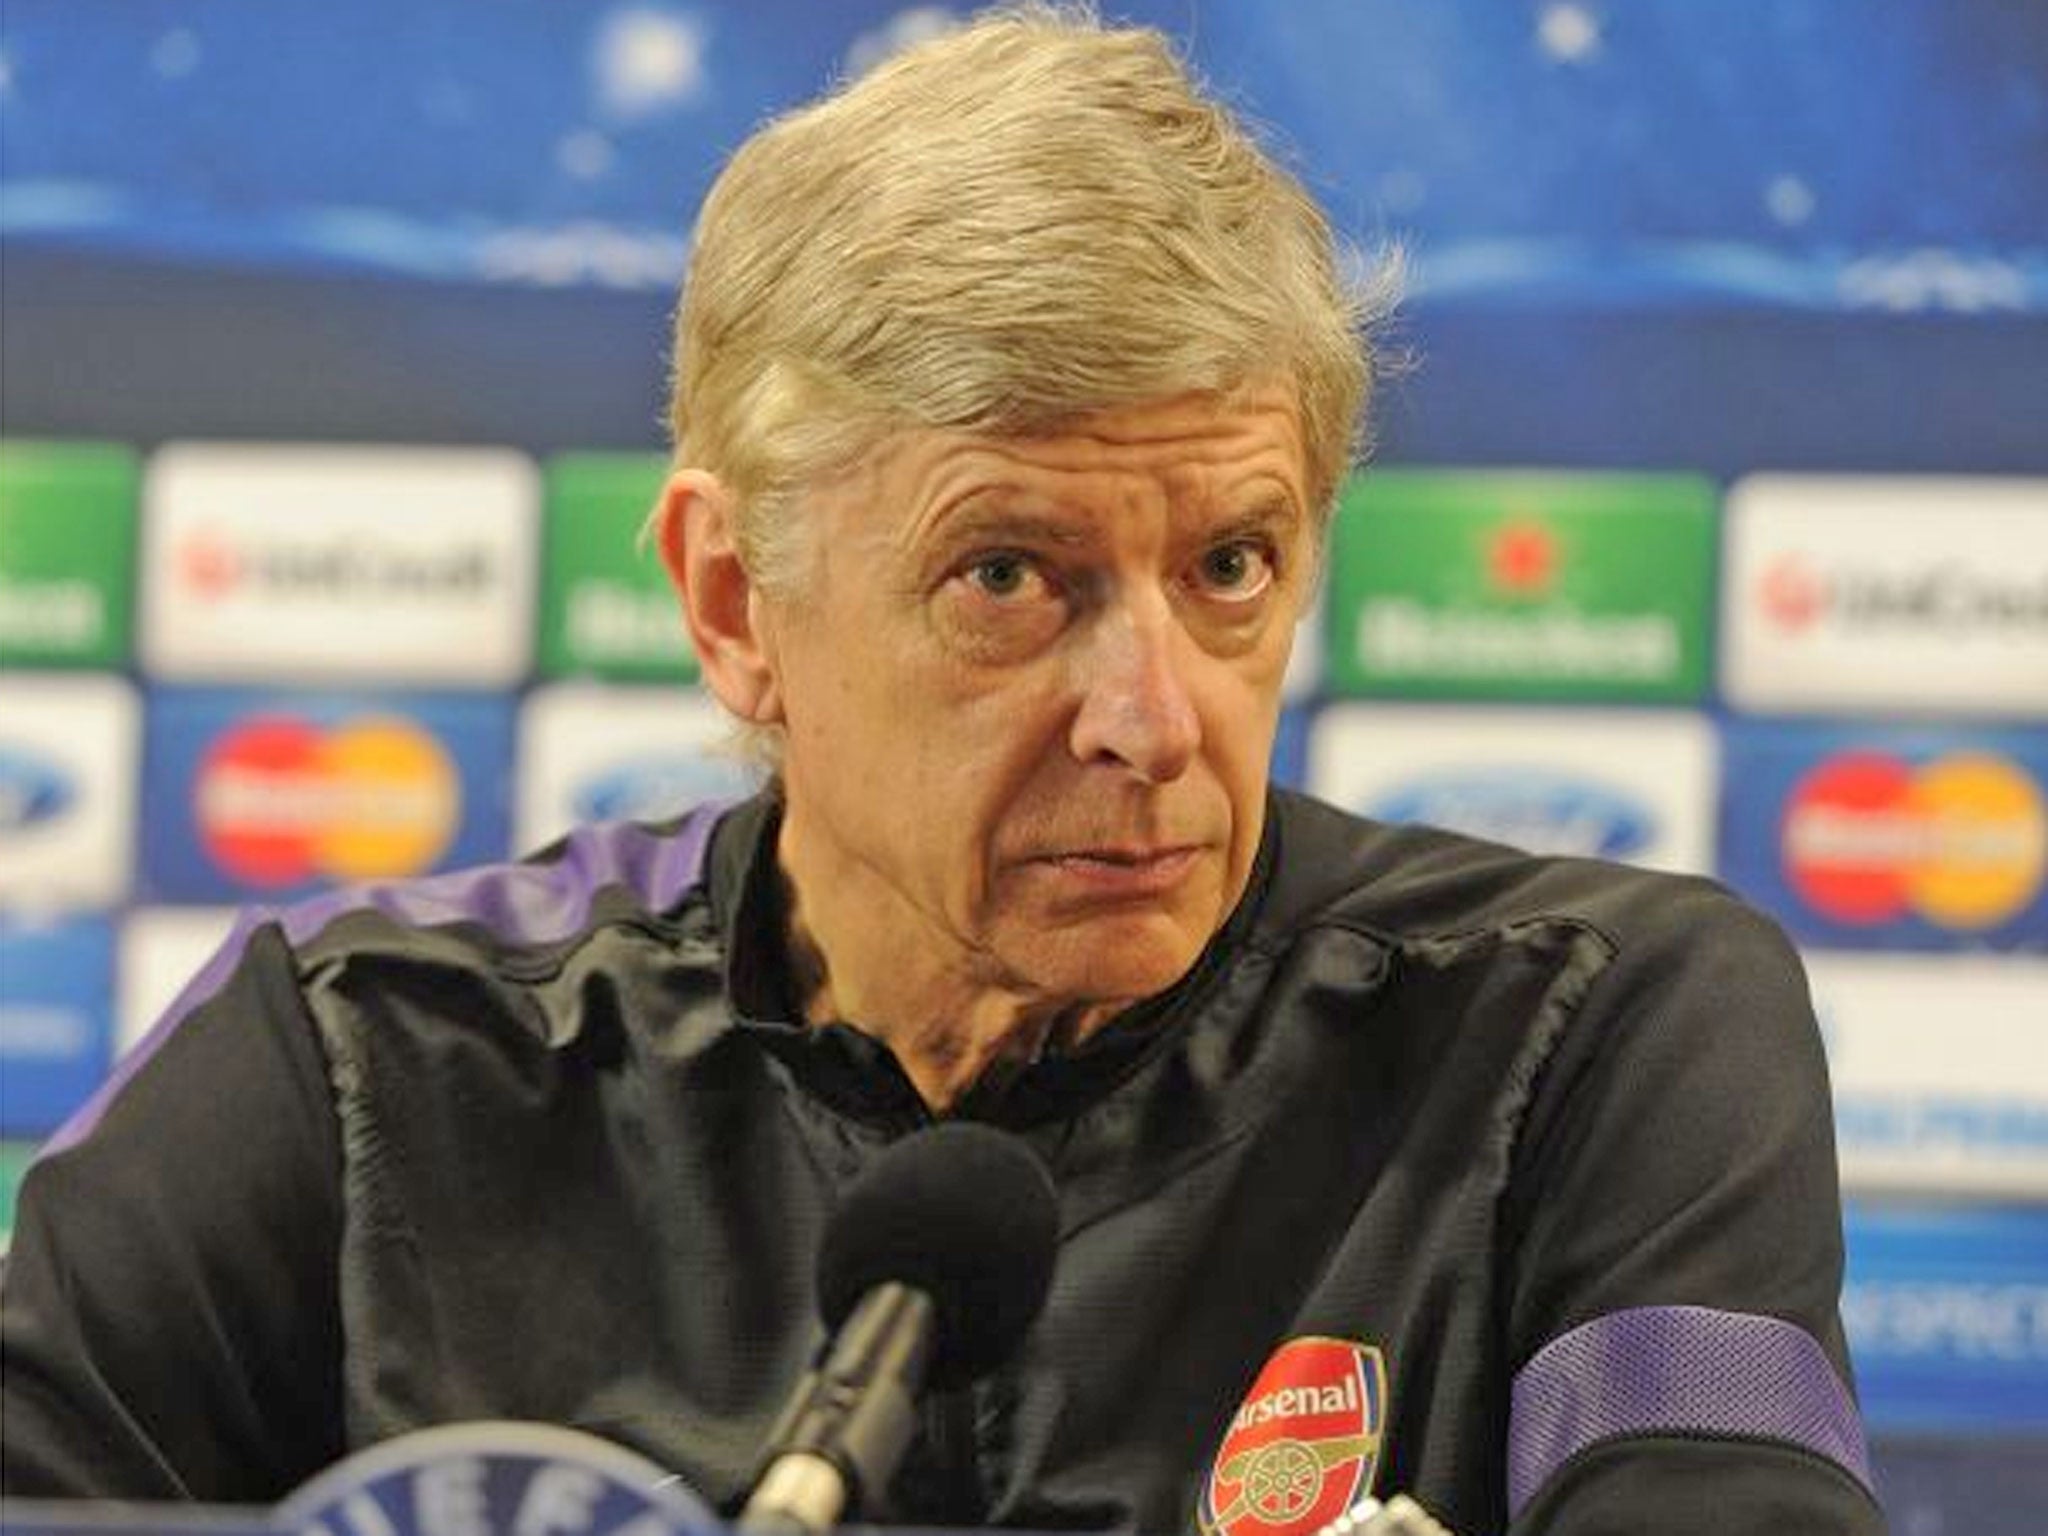 Wenger frustrated at inaccurate reports about his contract ahead of meeting with Munich